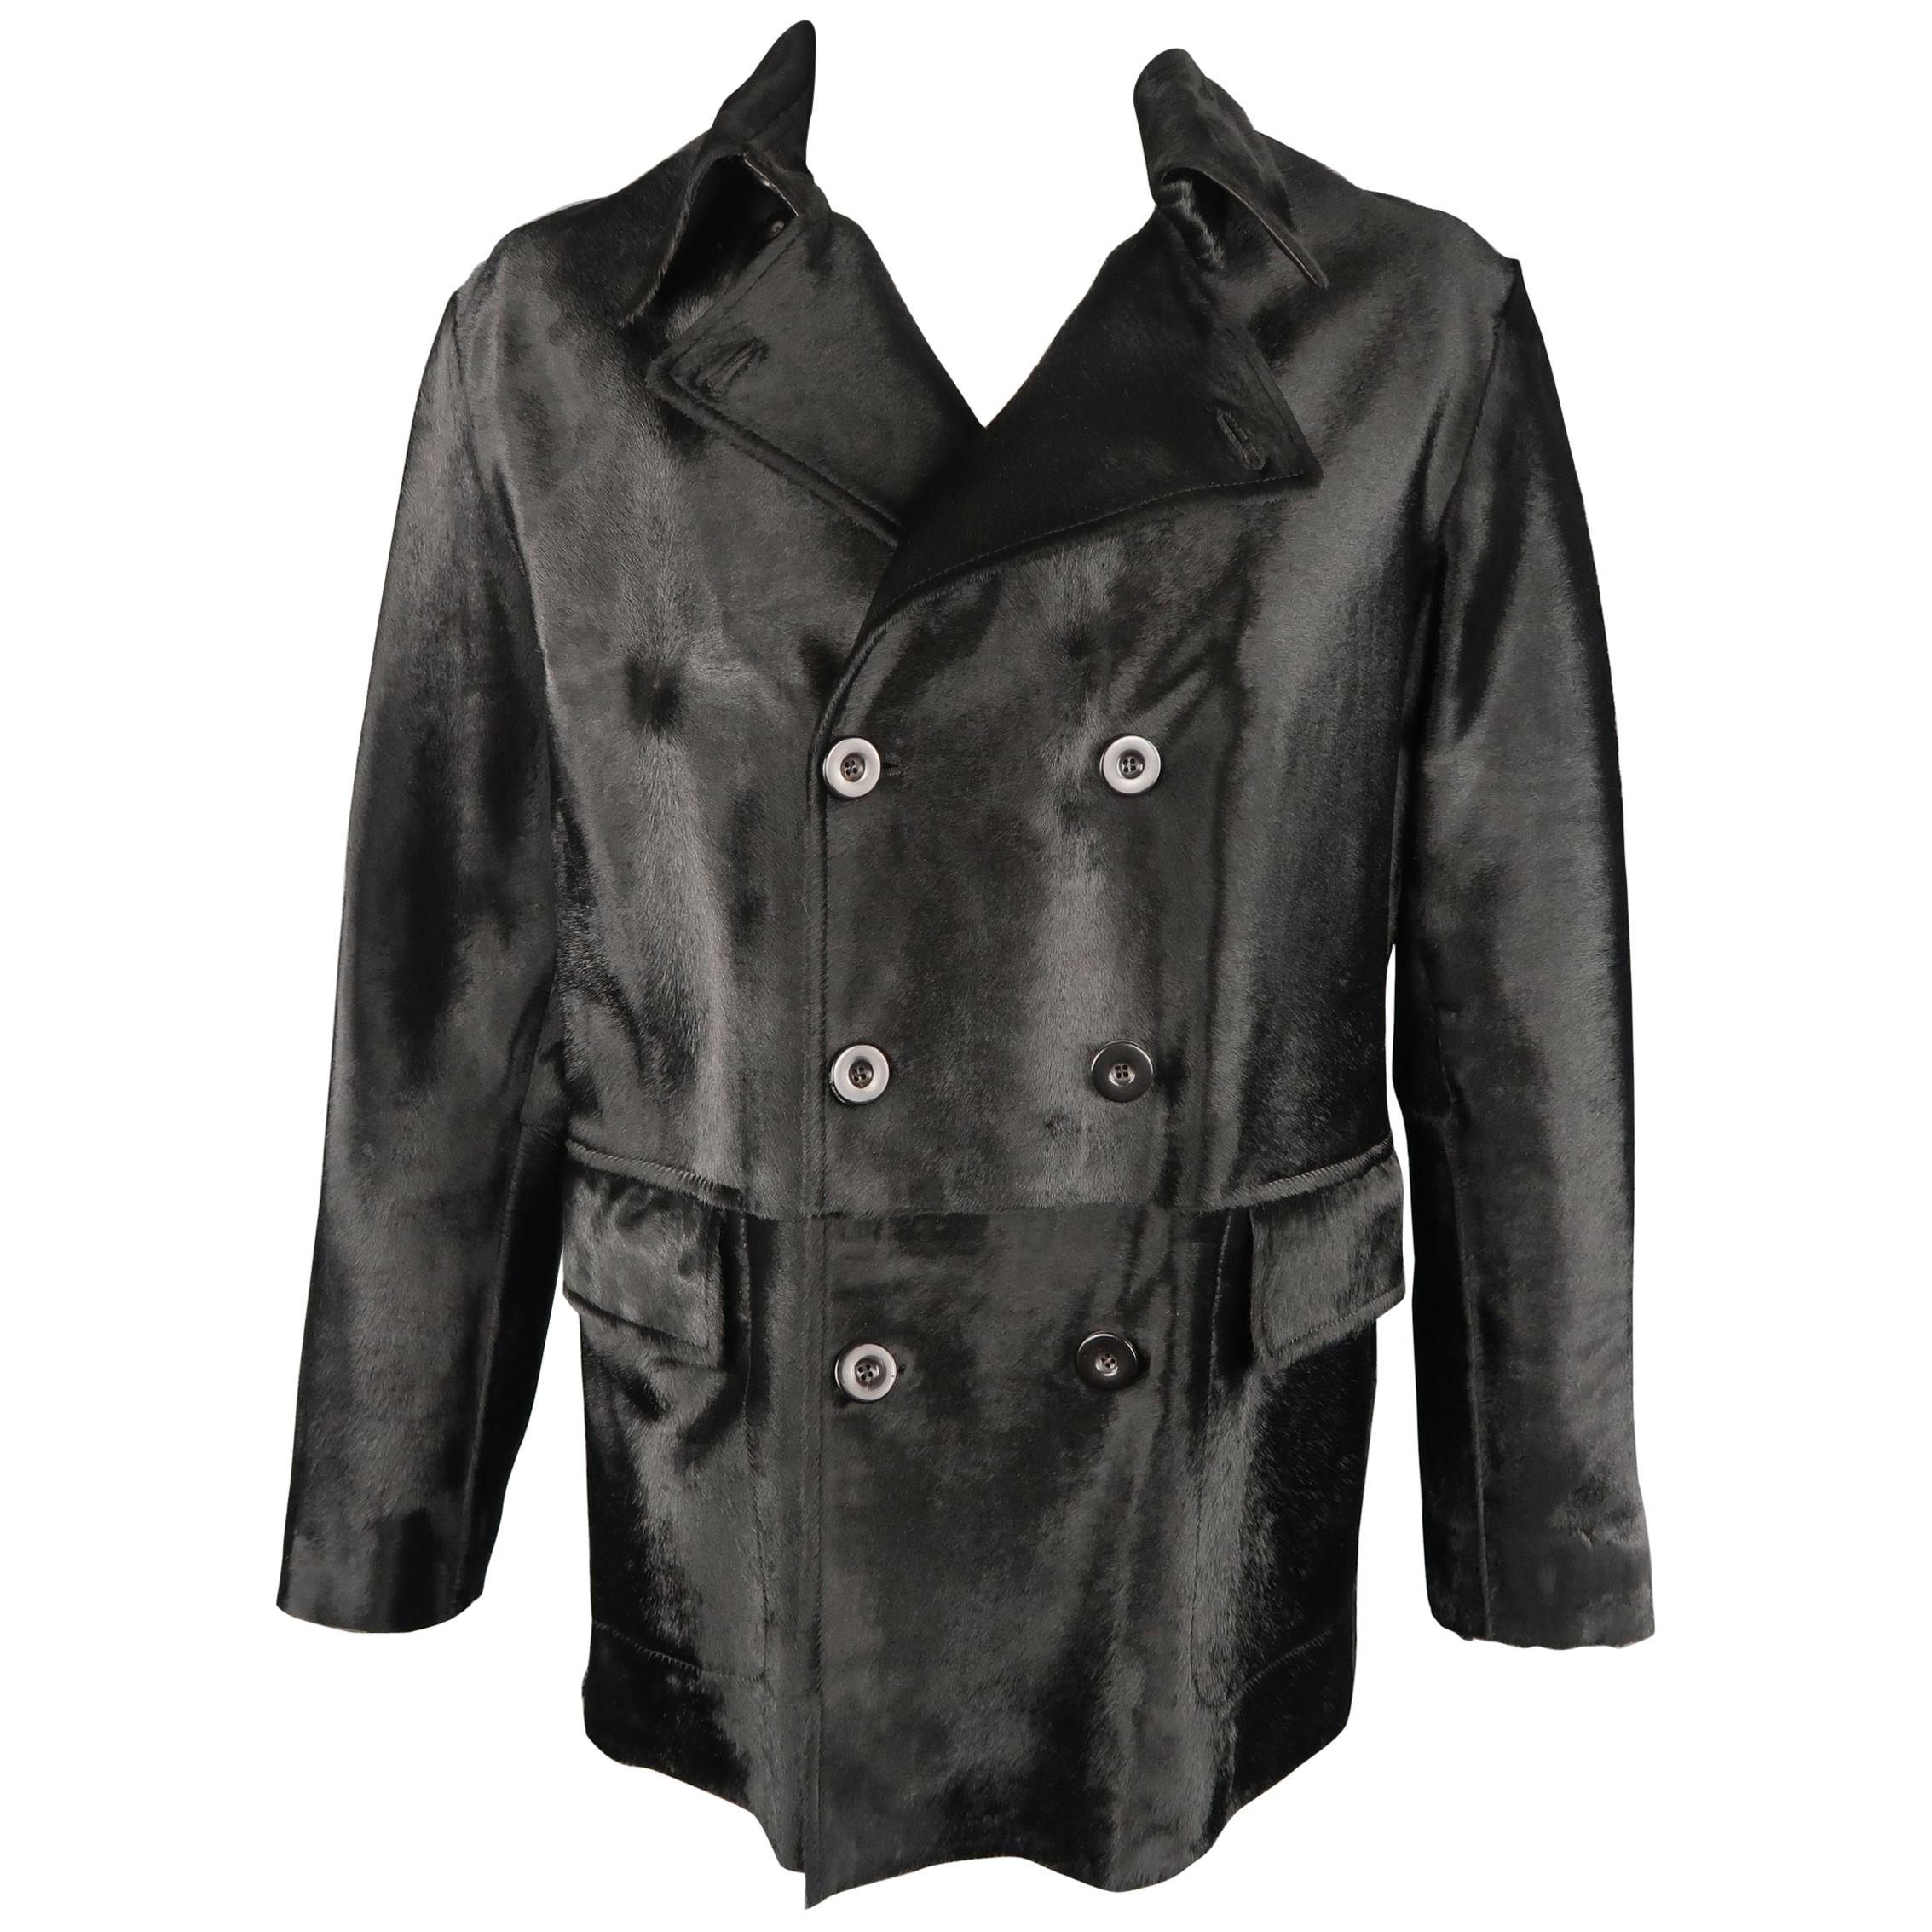 ARMANI COLLEZIONI 46 Black Ponyhair Leather Double Breasted Collared Jacket